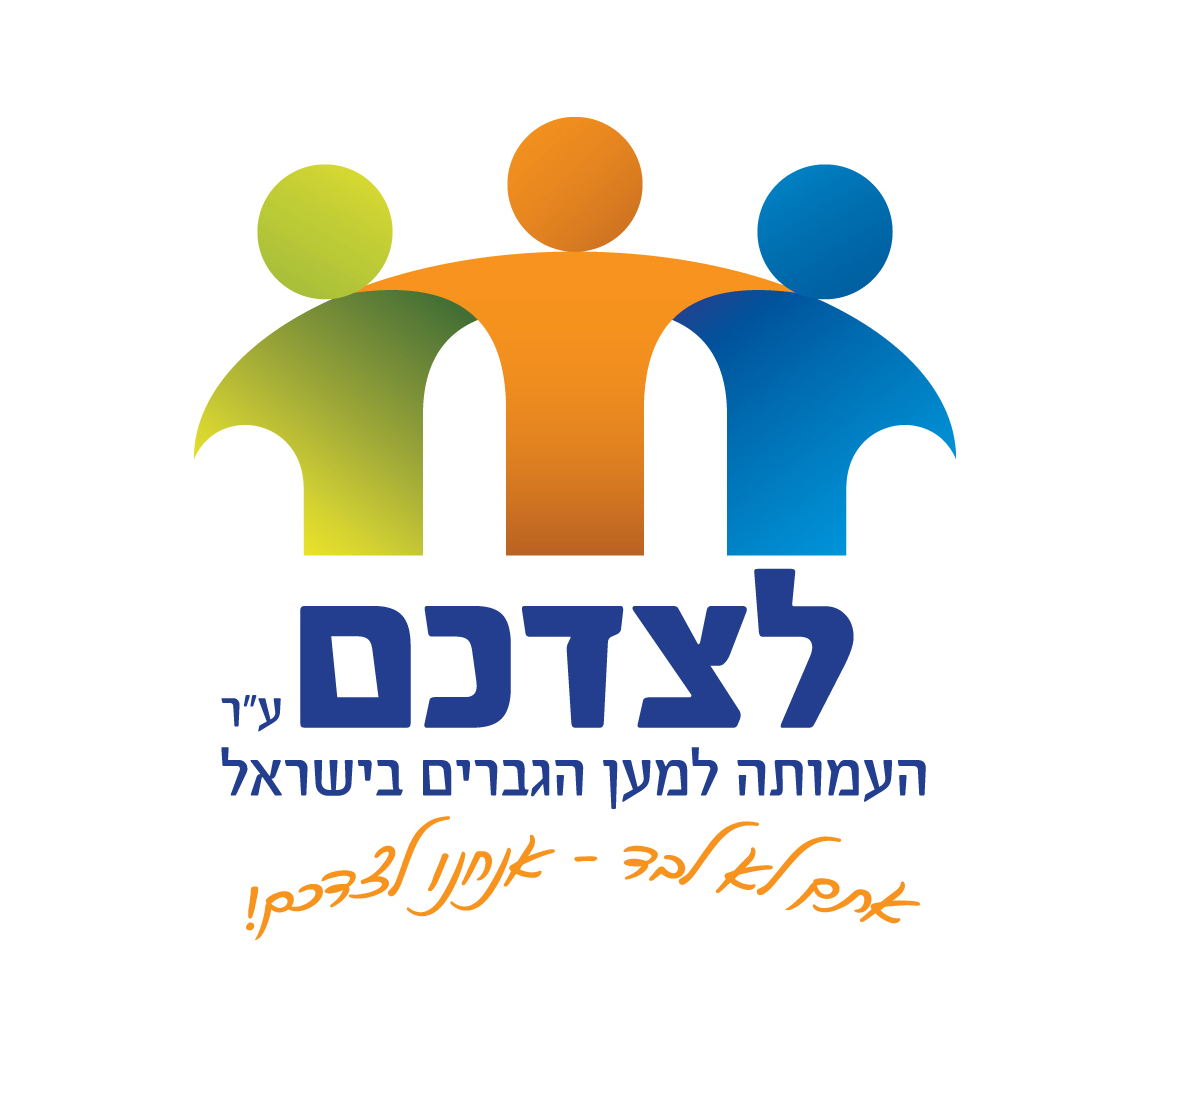 logo by your side LARGE CIRCLE - עמותת לצדכם by_your_side